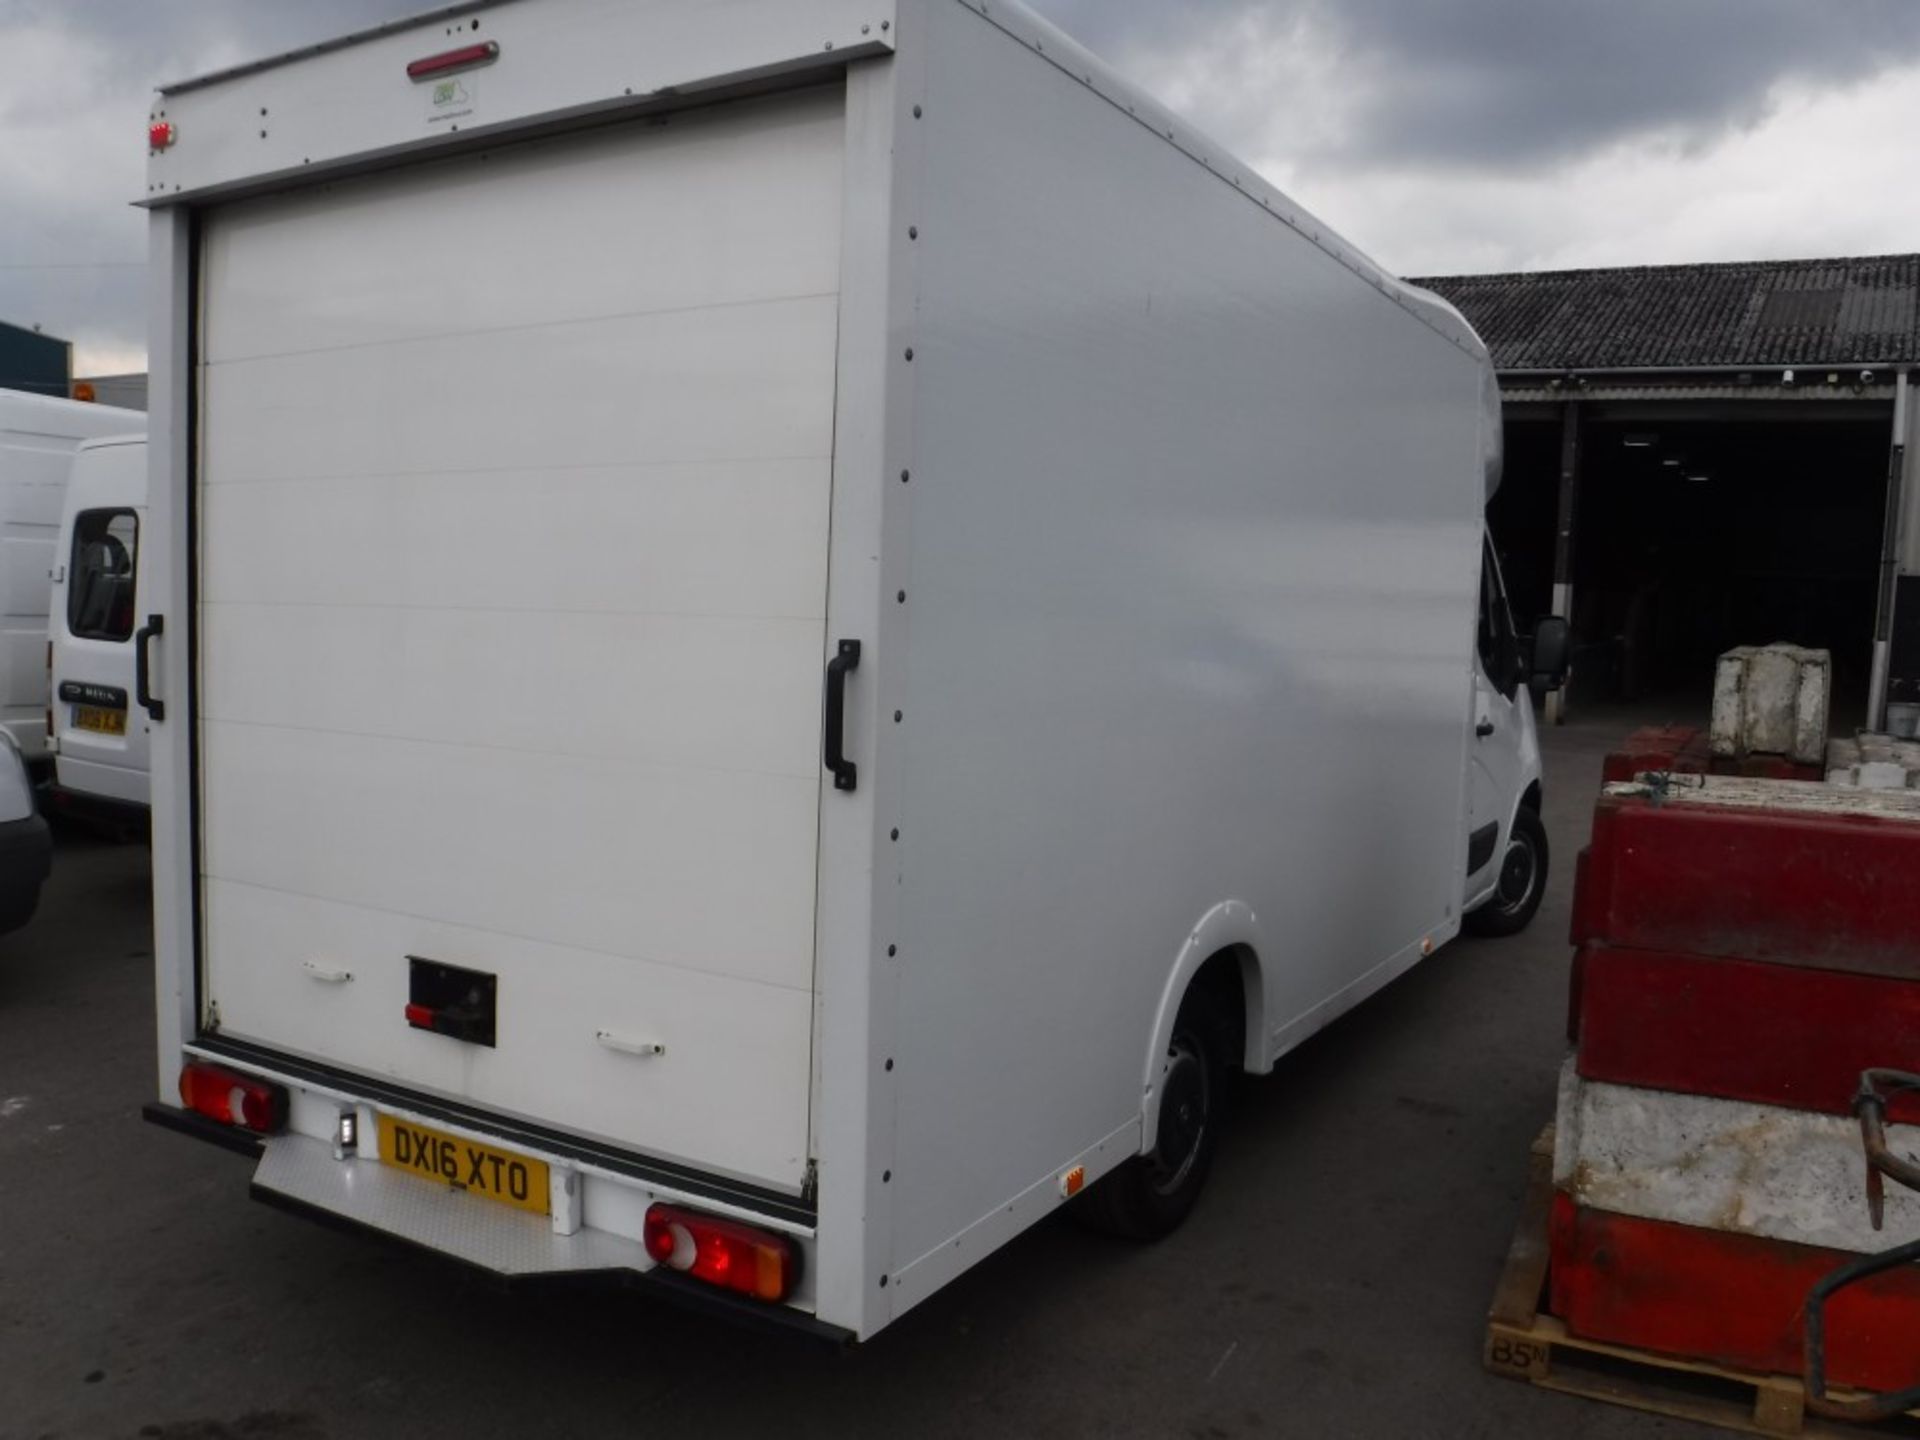 16 reg VAUXHALL MOVANO F3500 CDTI BOX VAN, 1ST REG 03/16, 135858M WARRANTED, V5 HERE, 1 OWNER FROM - Image 4 of 5